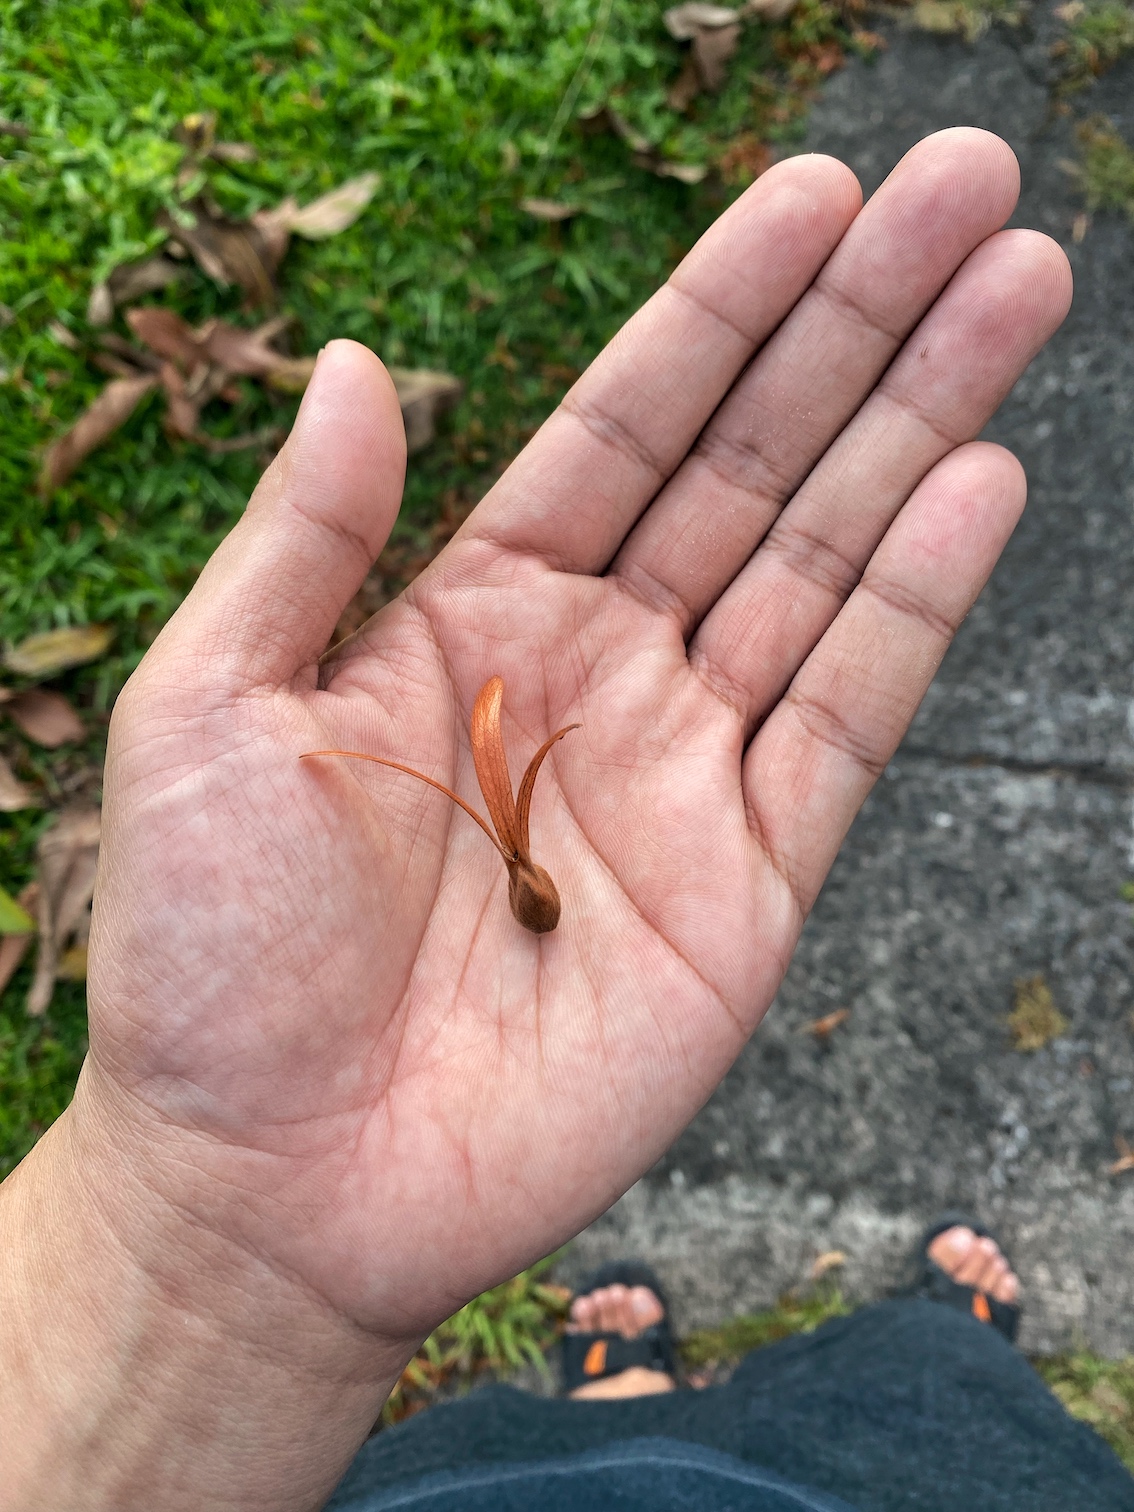 A tiny seed from a tree